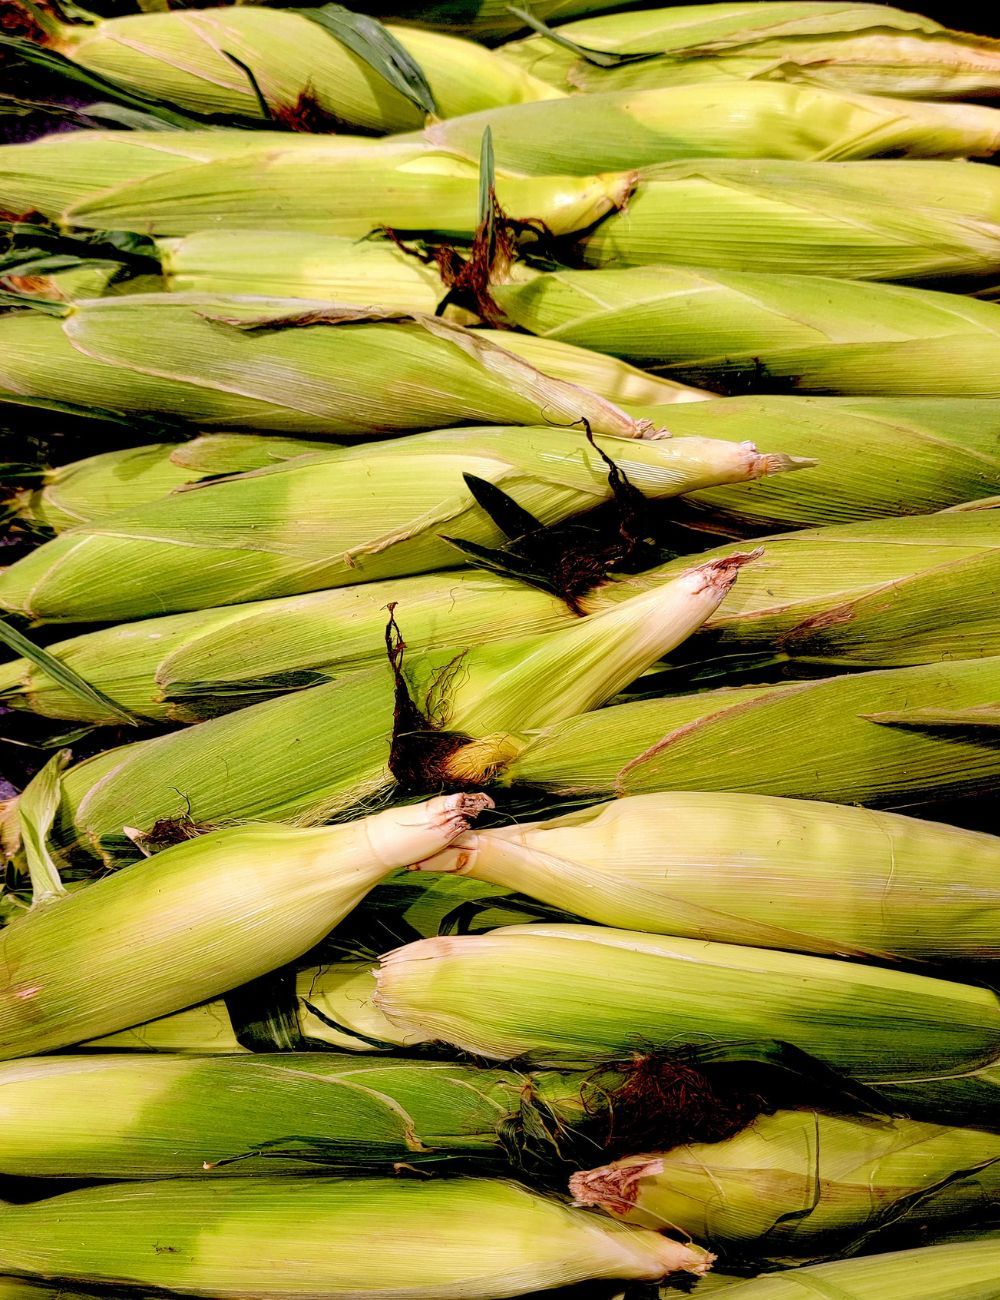 A bundle of corn waiting to be grilled! Fresh sweet corn.